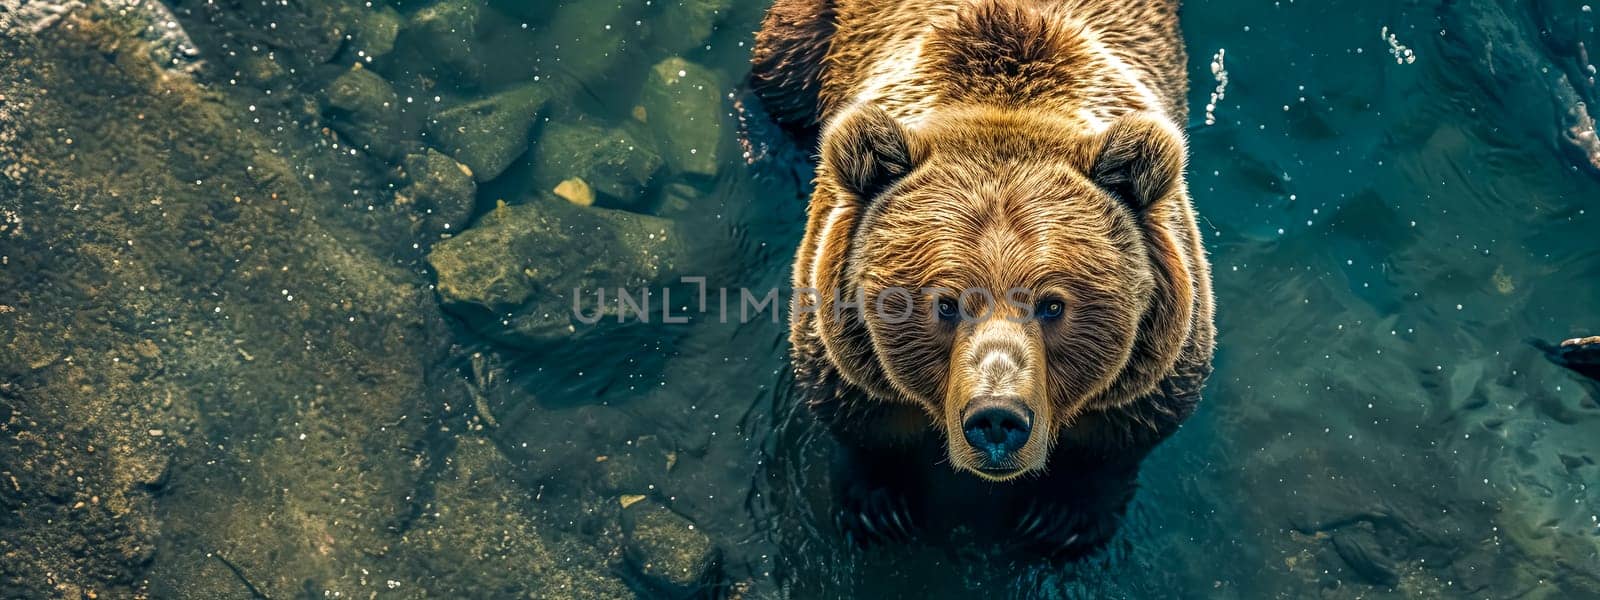 An intimate top-down view of a grizzly bear in water, offering a unique perspective on the majestic creature and its natural environment. copy space